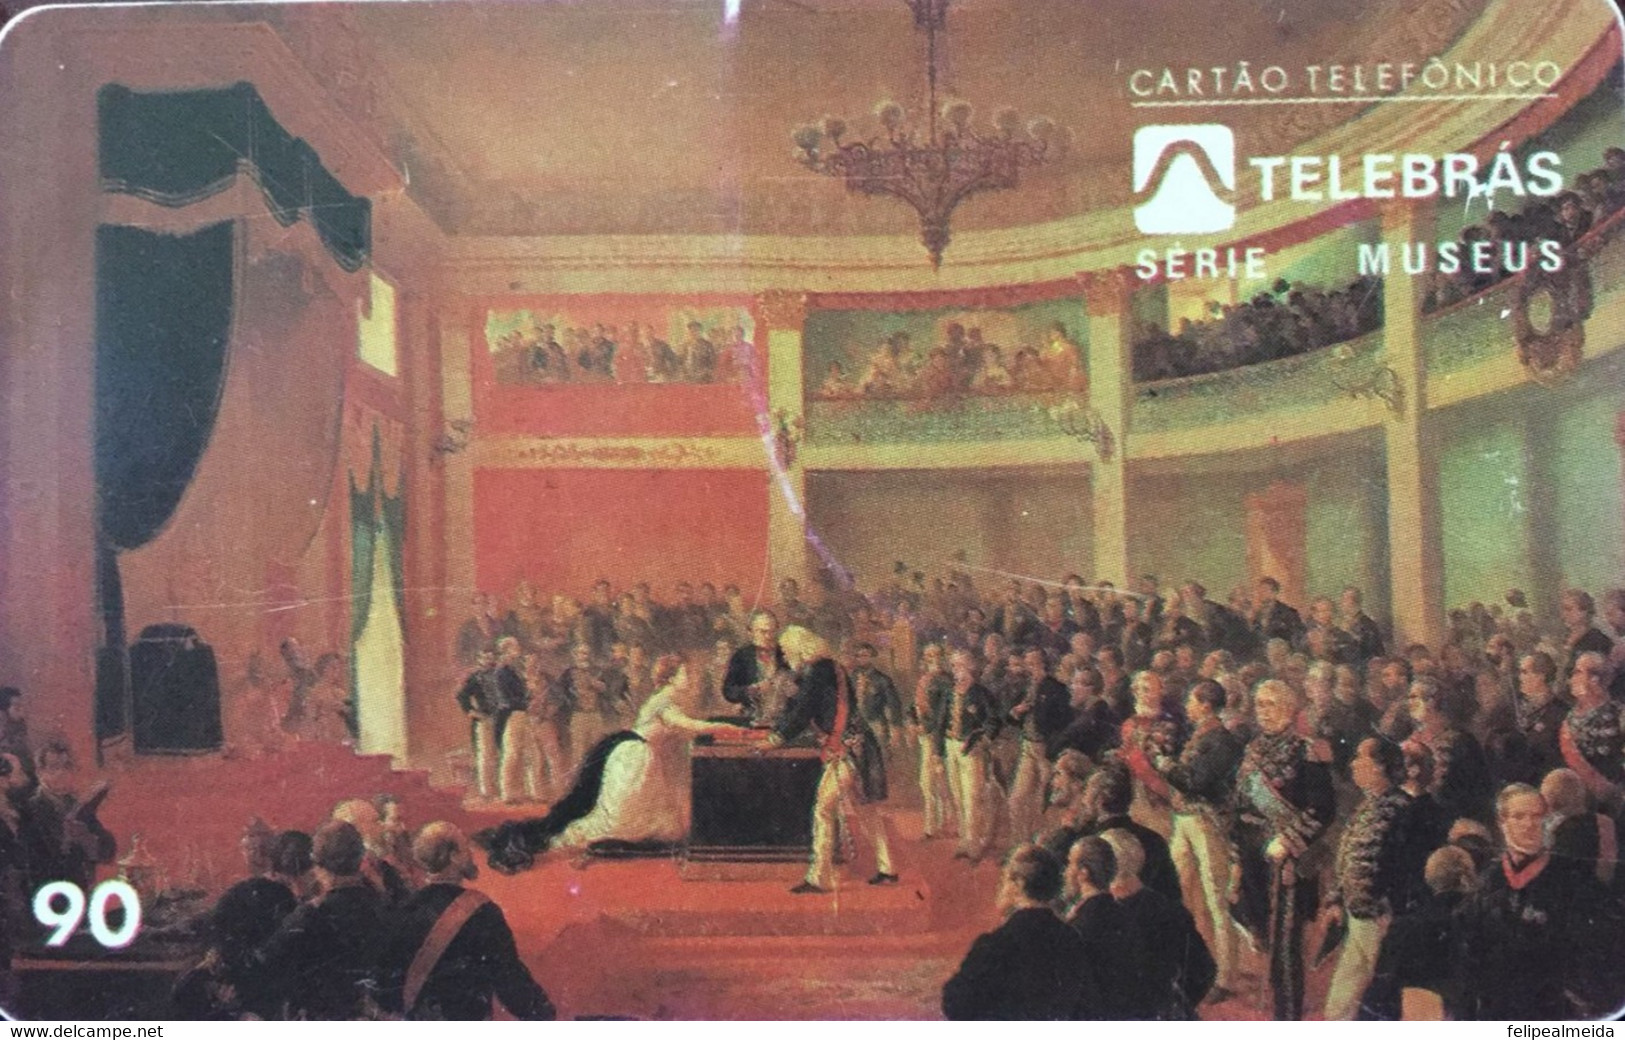 Phone Card Manufactured By Telebras In 1996 - Museum Series - Painting Oath Of Princess Isabel - Painter Victor Meirelle - Peinture